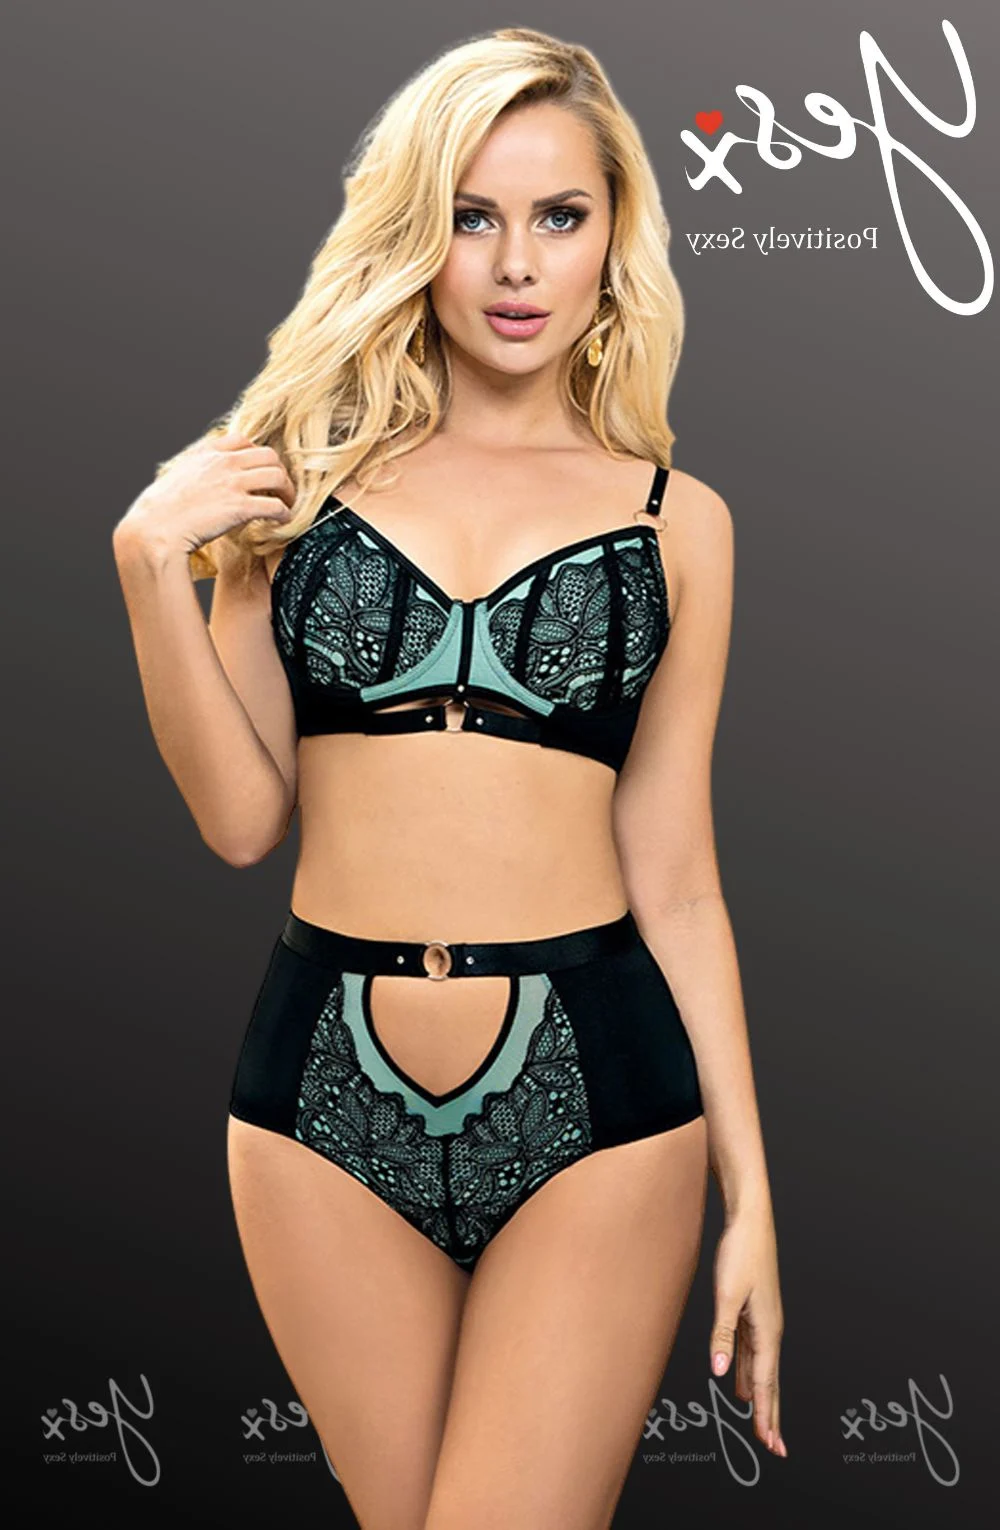 YesX YX830 Blue Lace Bra and Brief Set - Sexy Lingerie for Women